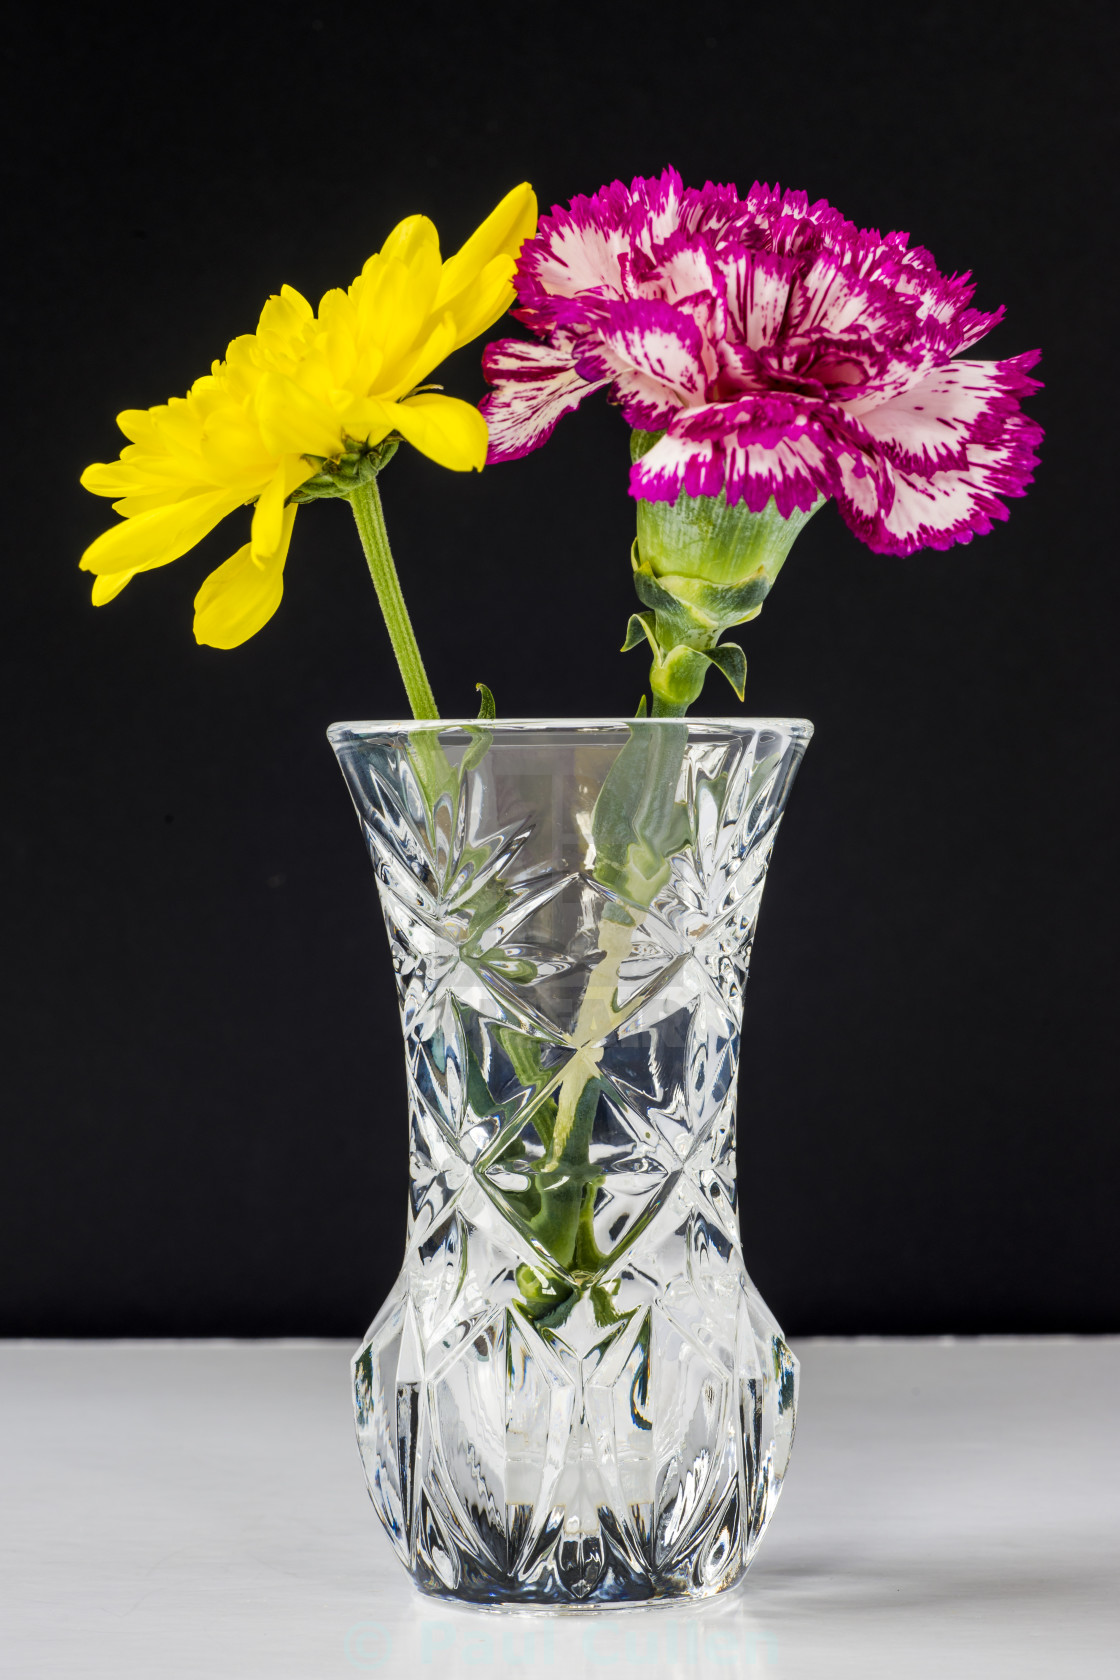 "Chrysanthemums and Carnation in a lead crysal vase." stock image